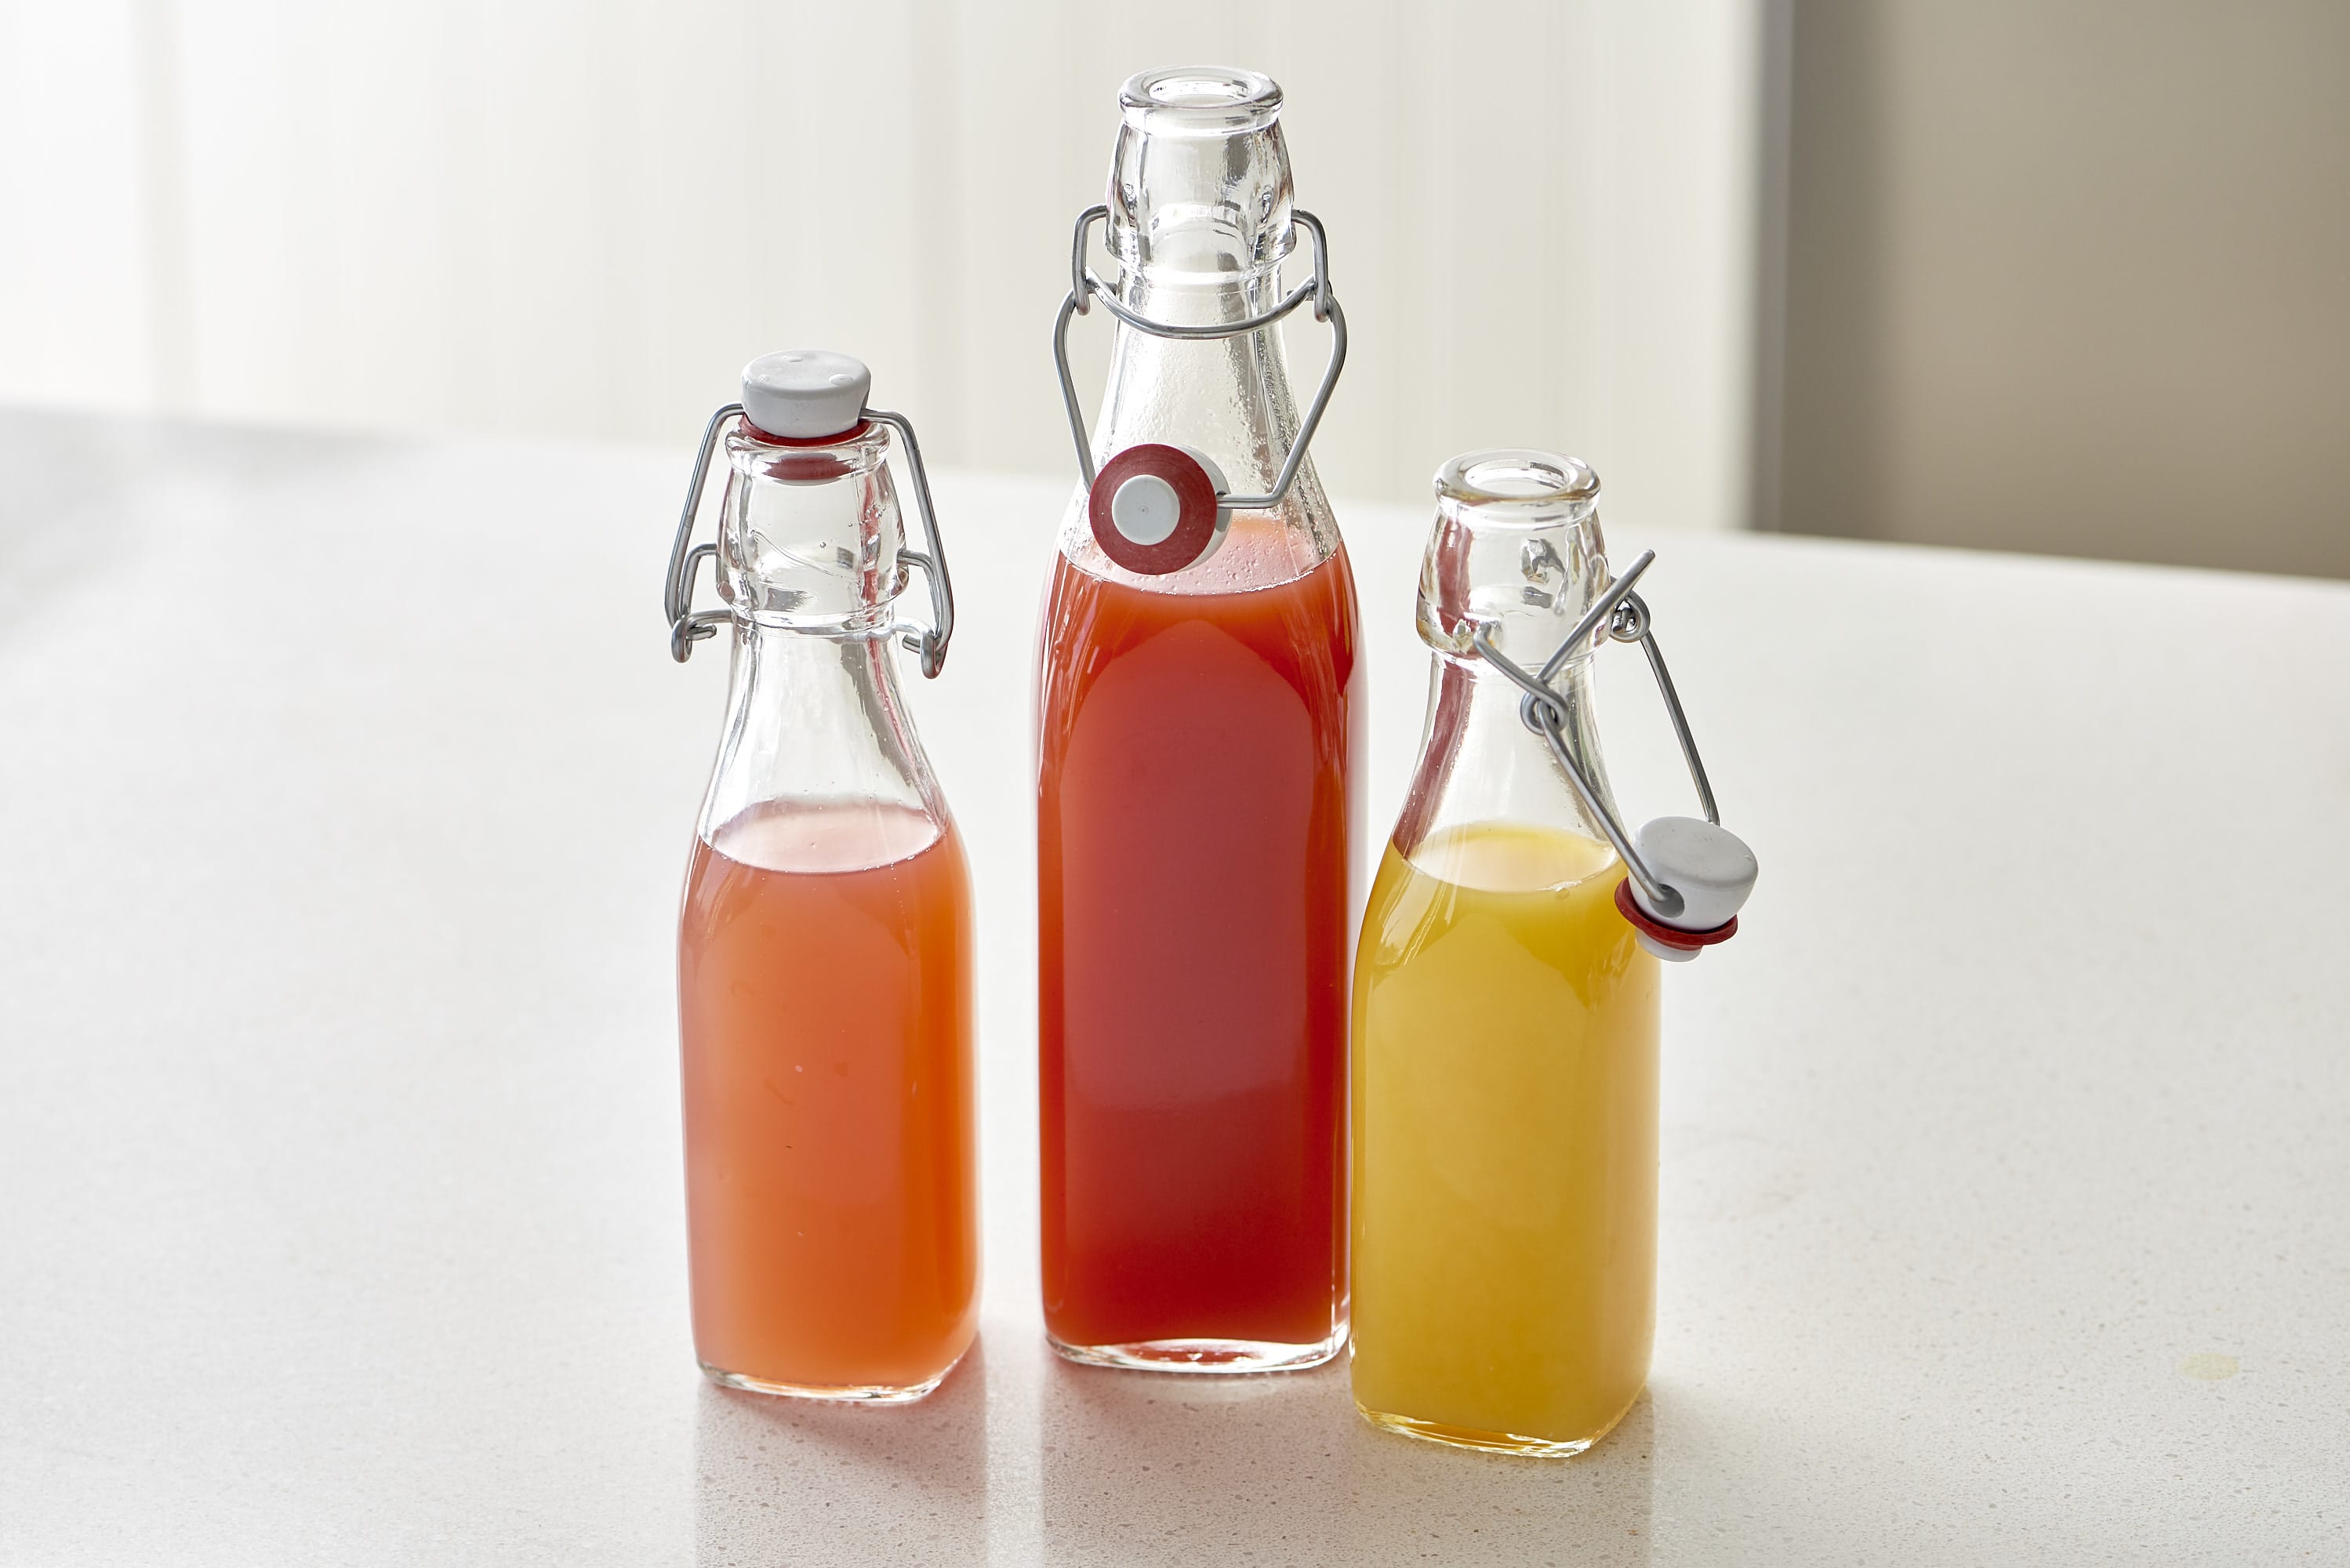 How To Make Fizzy Cleaning Tabs For Hard-To-Clean Bottles